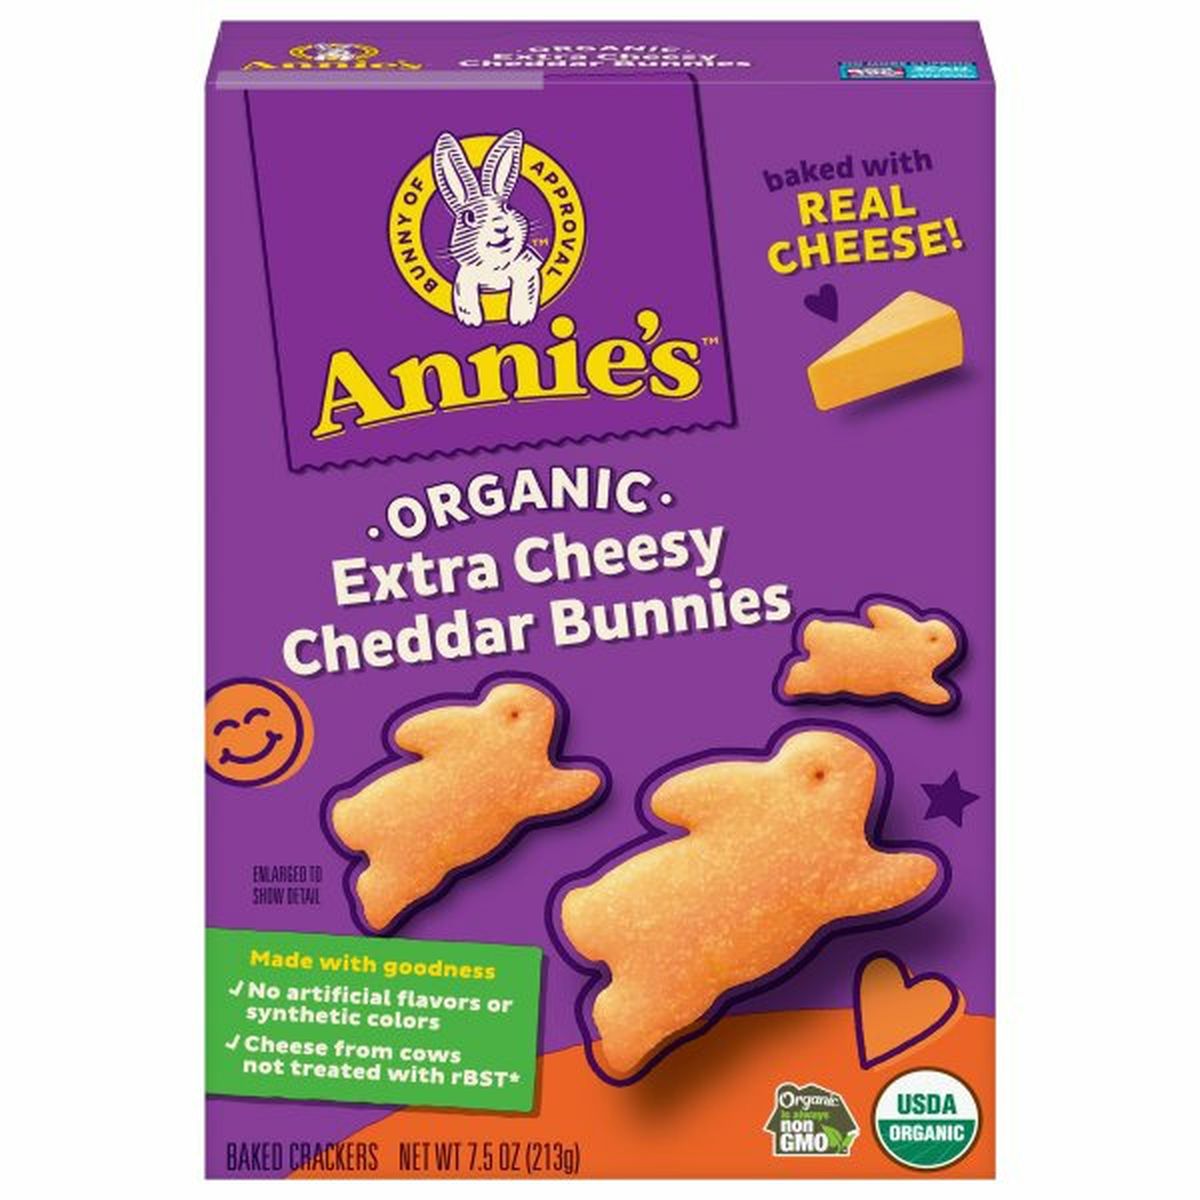 Calories in Annie's Baked Crackers, Organic, Extra Cheesy, Cheddar Bunnies